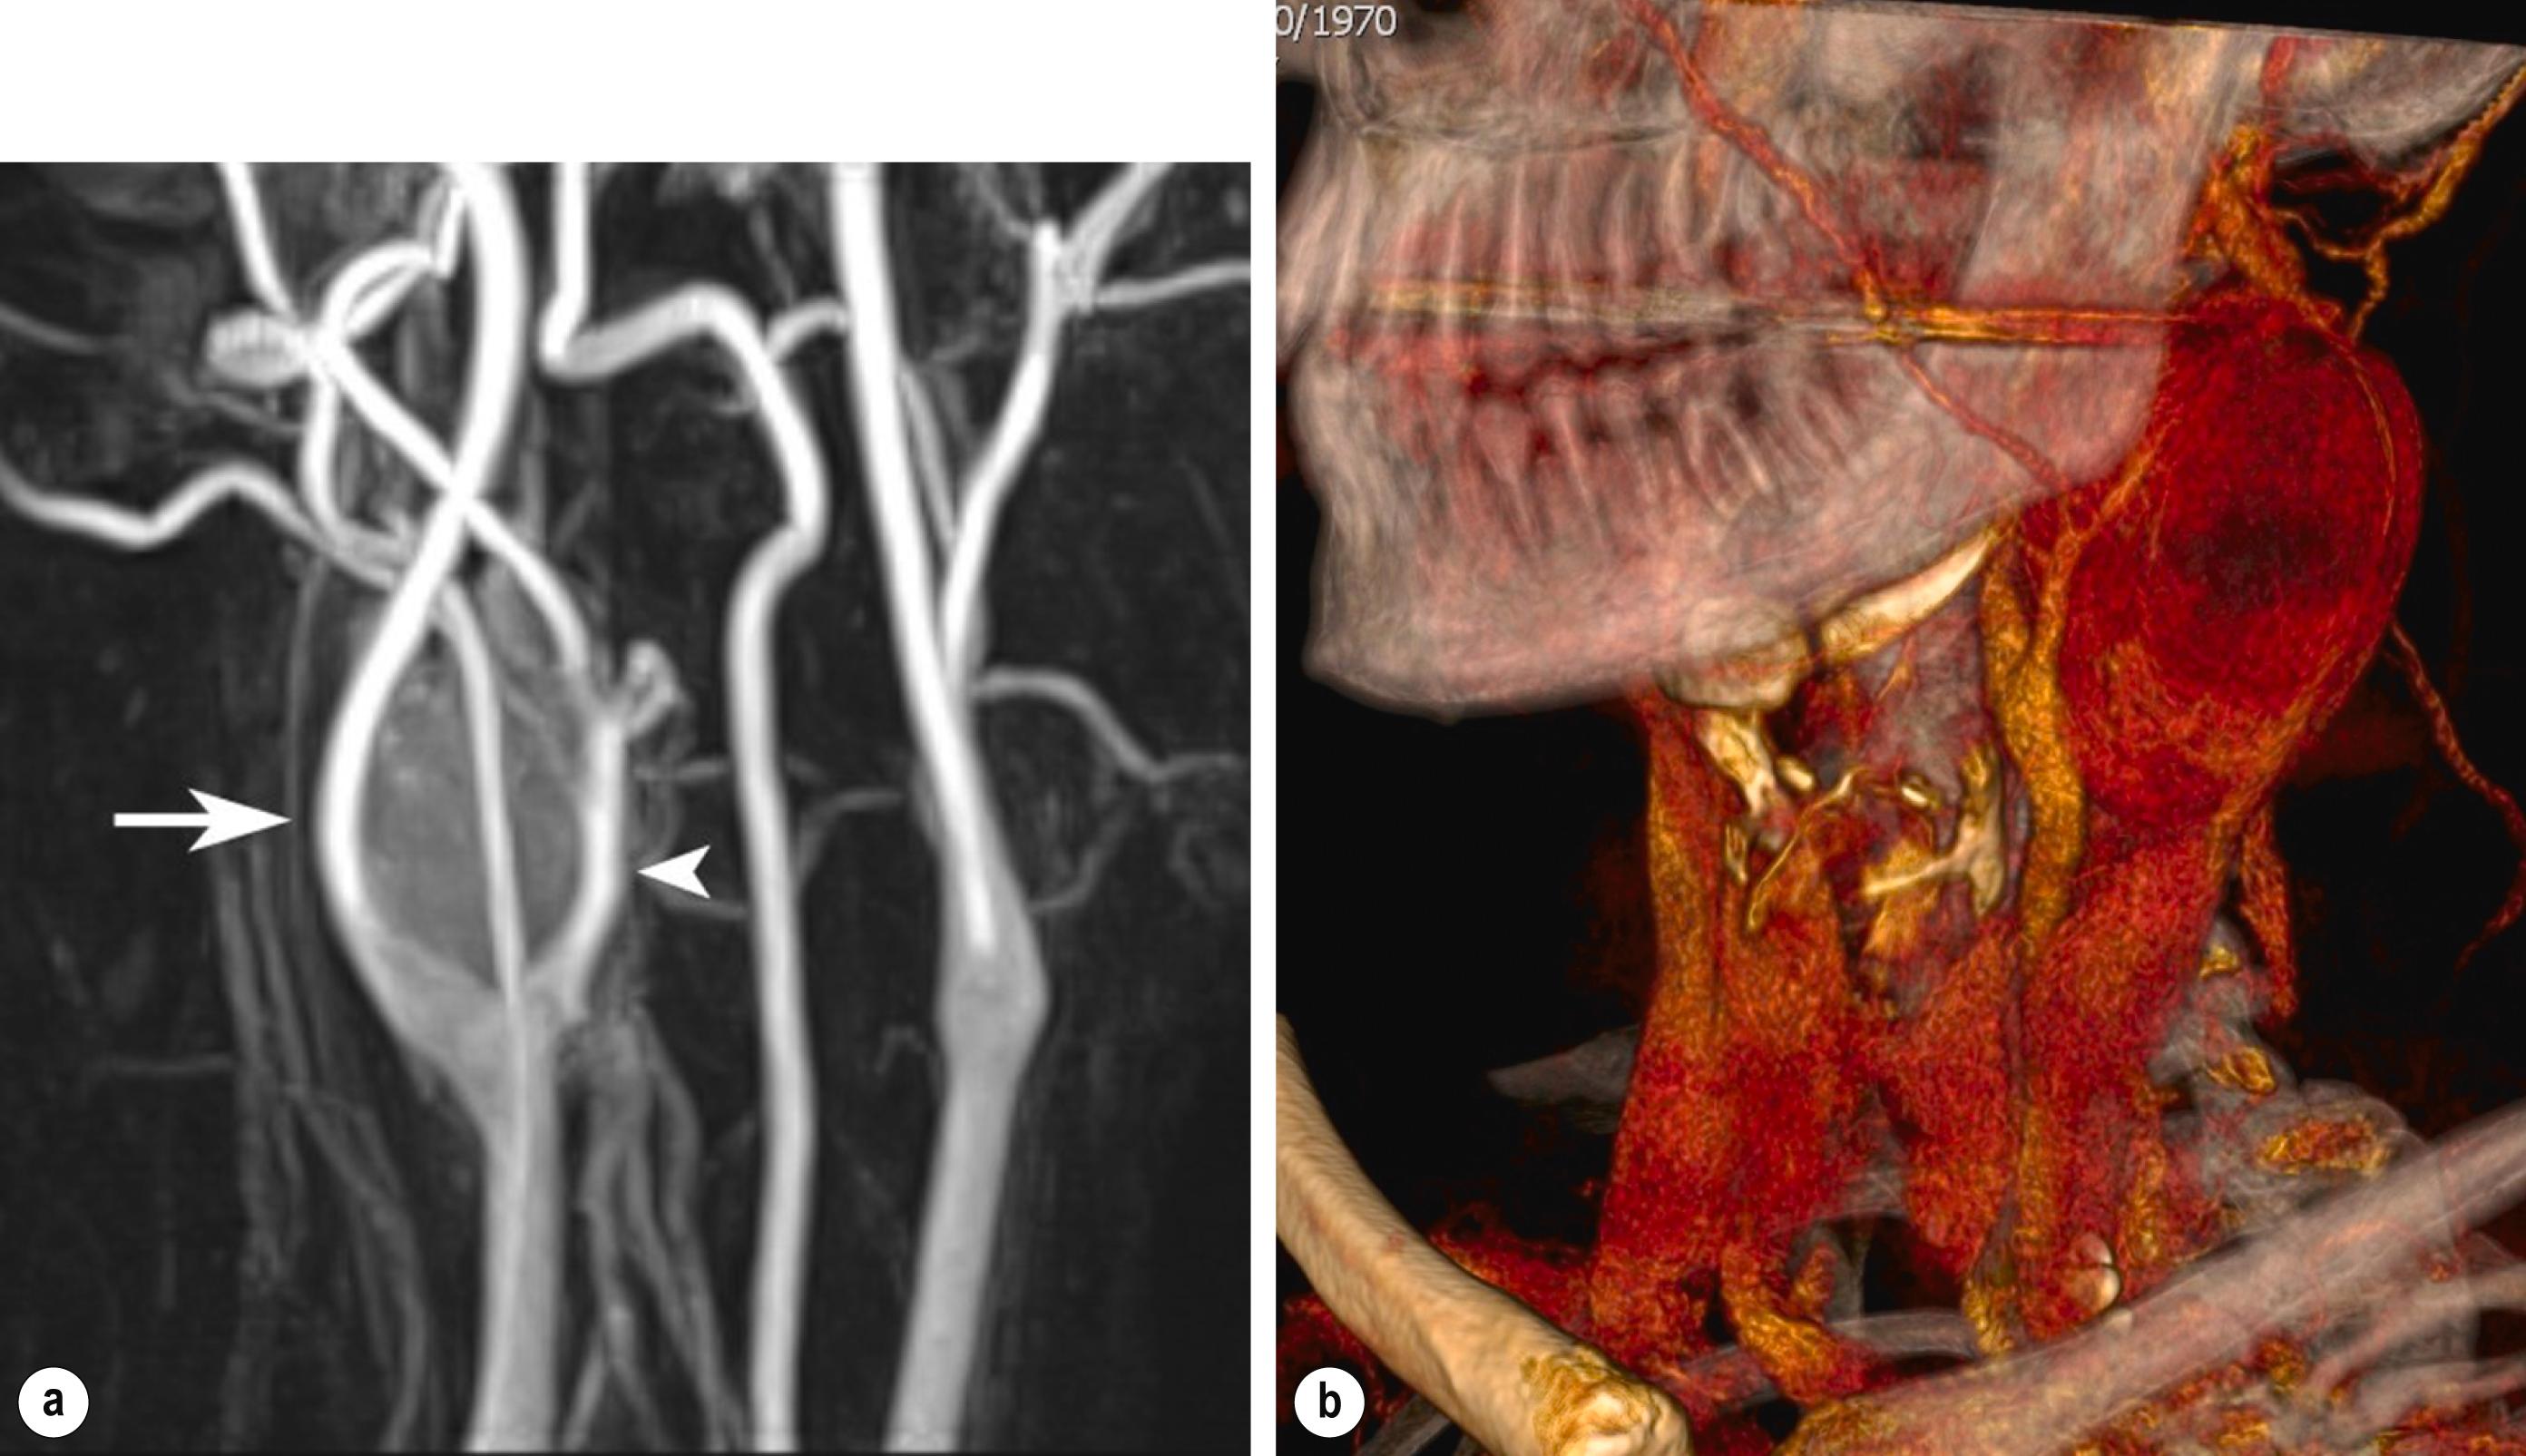 Figure 10.5, (a) Maximum intensity projection reconstruction of magnetic resonance angiography (MRA) of a highly vascular right carotid body tumour causing splaying of the bifurcation (right internal carotid, arrow ; right external carotid artery, arrowhead ). (b) Three-dimensional computed tomography angiogram of a probable glomus vagale tumour. Note that the tumour does not splay the bifurcation, but it pushes between the external and internal carotid arteries from a posterior location higher up in the neck.